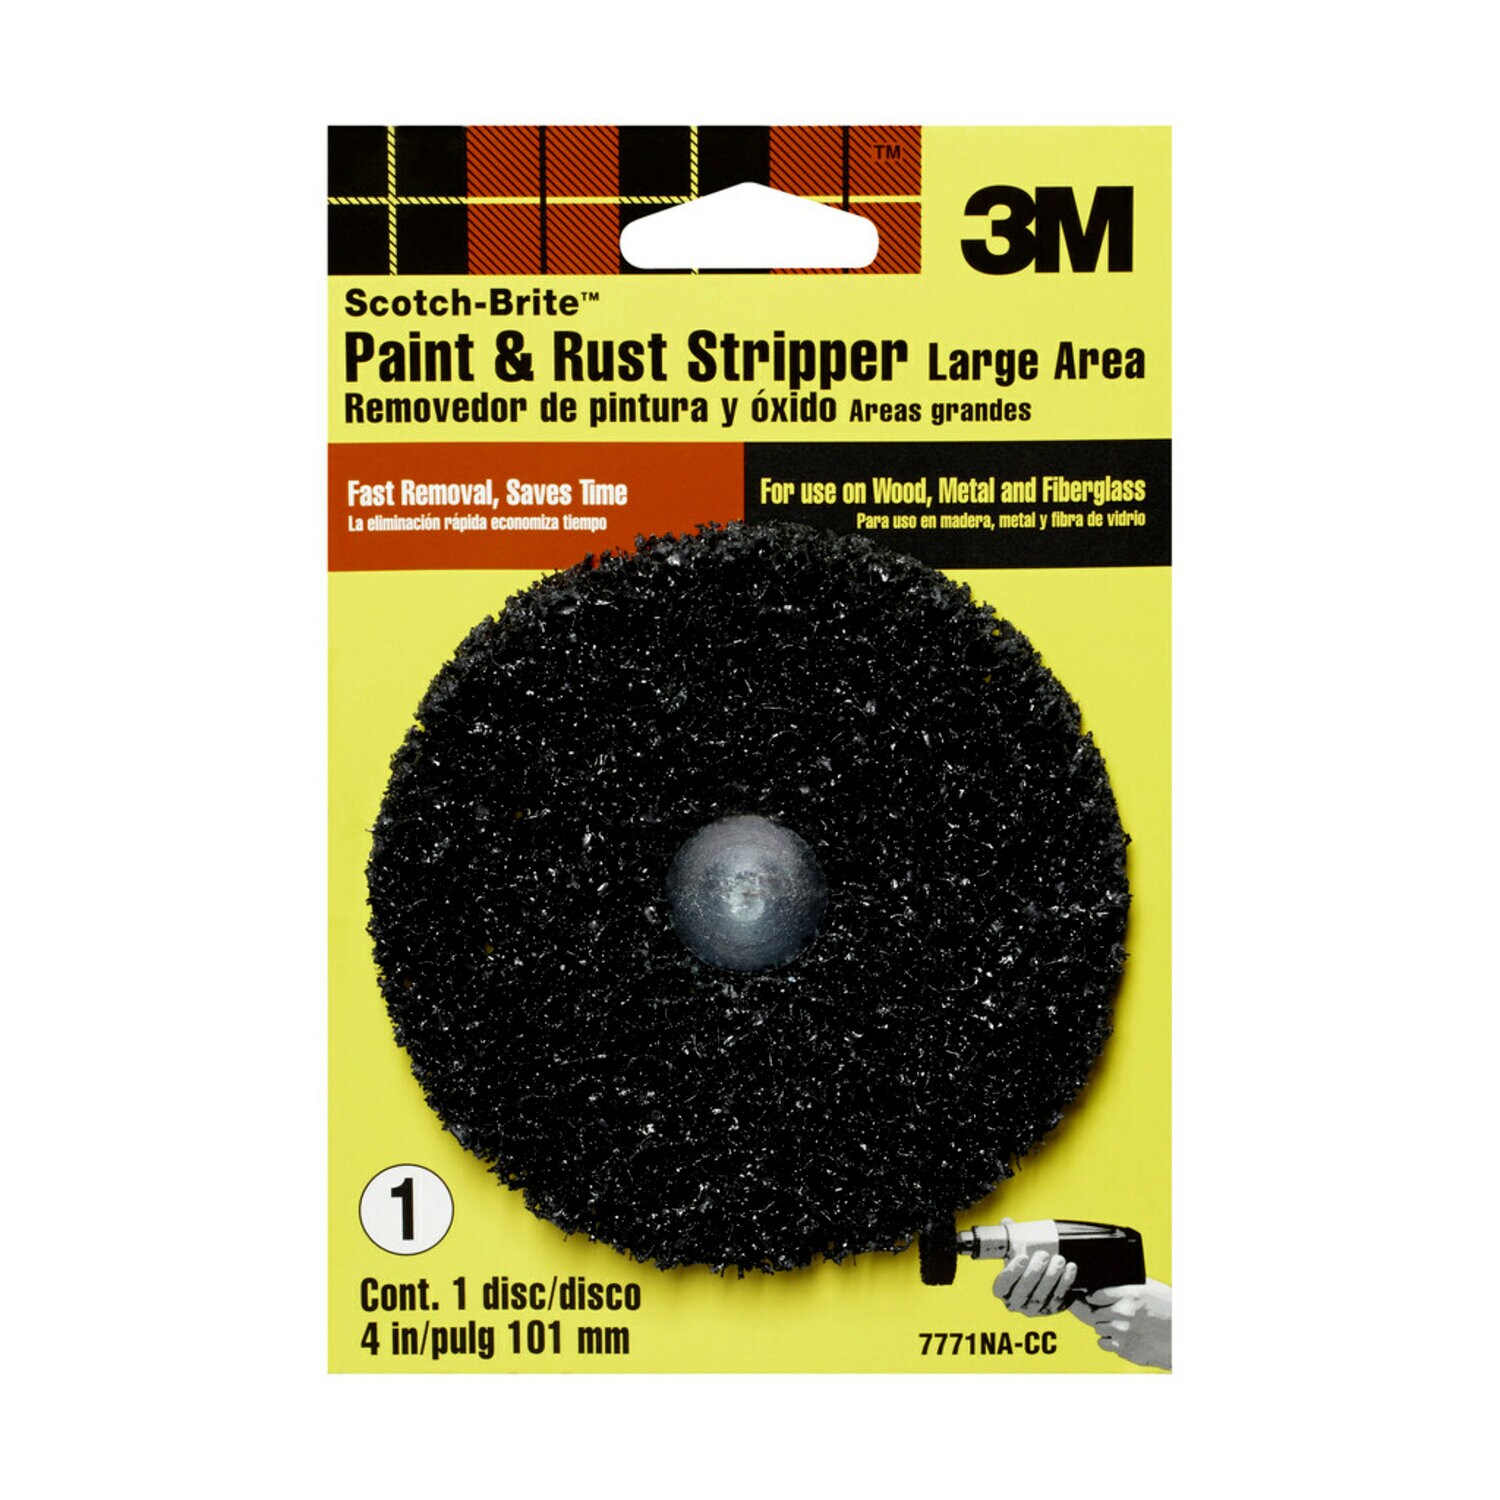 7010312227 - 3M Paint and Rust Stripper 7771NA-CC